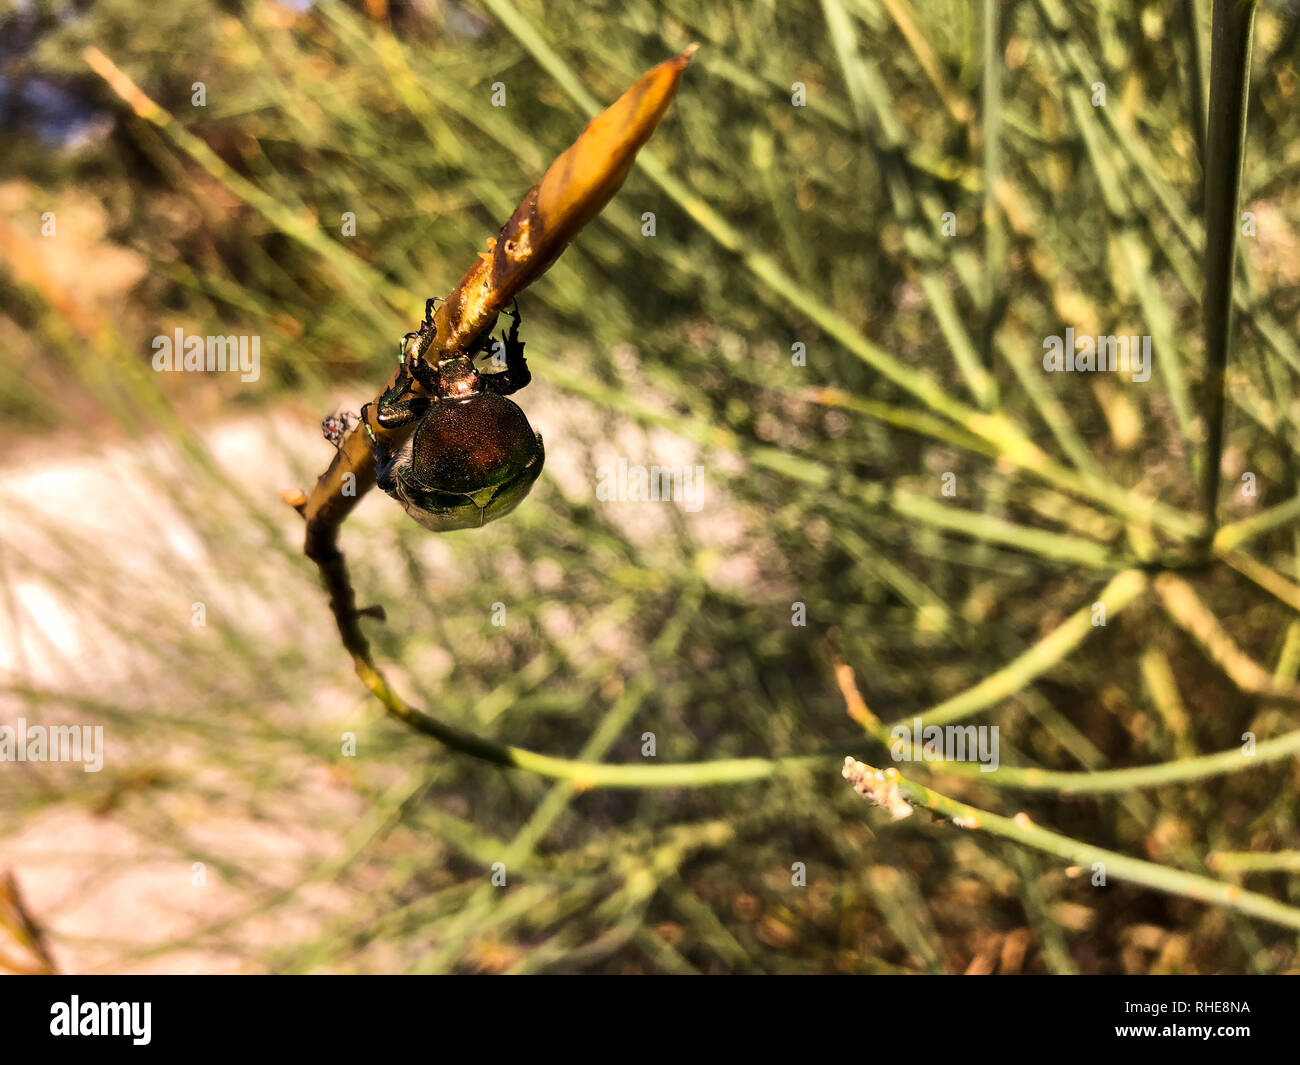 Dung beetle on a plant. Stock Photo